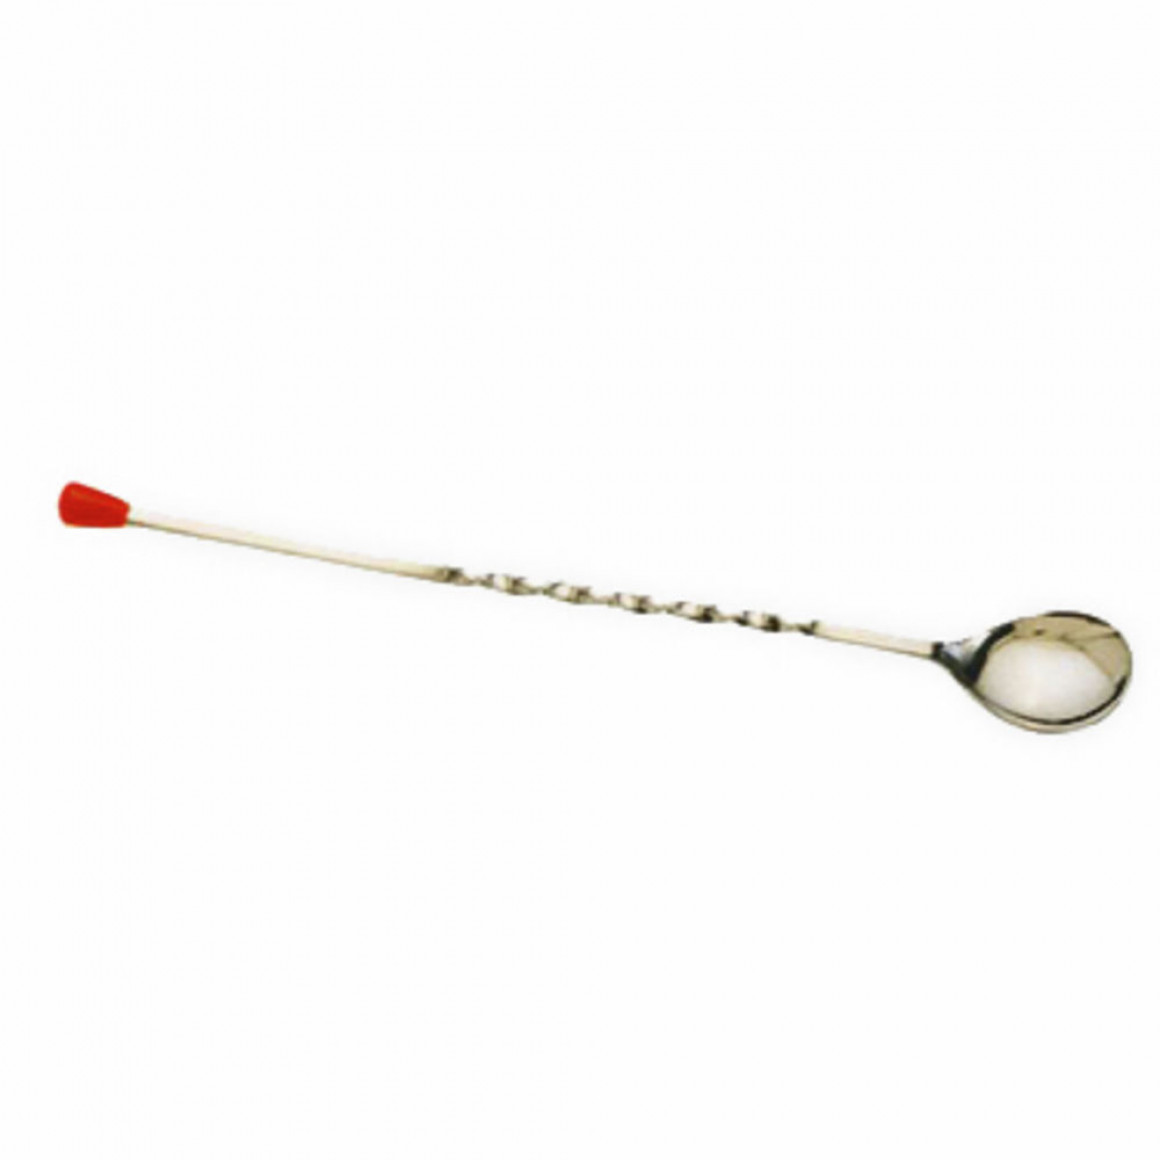 BAR SPOON, STAINLESS STEEL, TWISTED, RED KNOB, 10